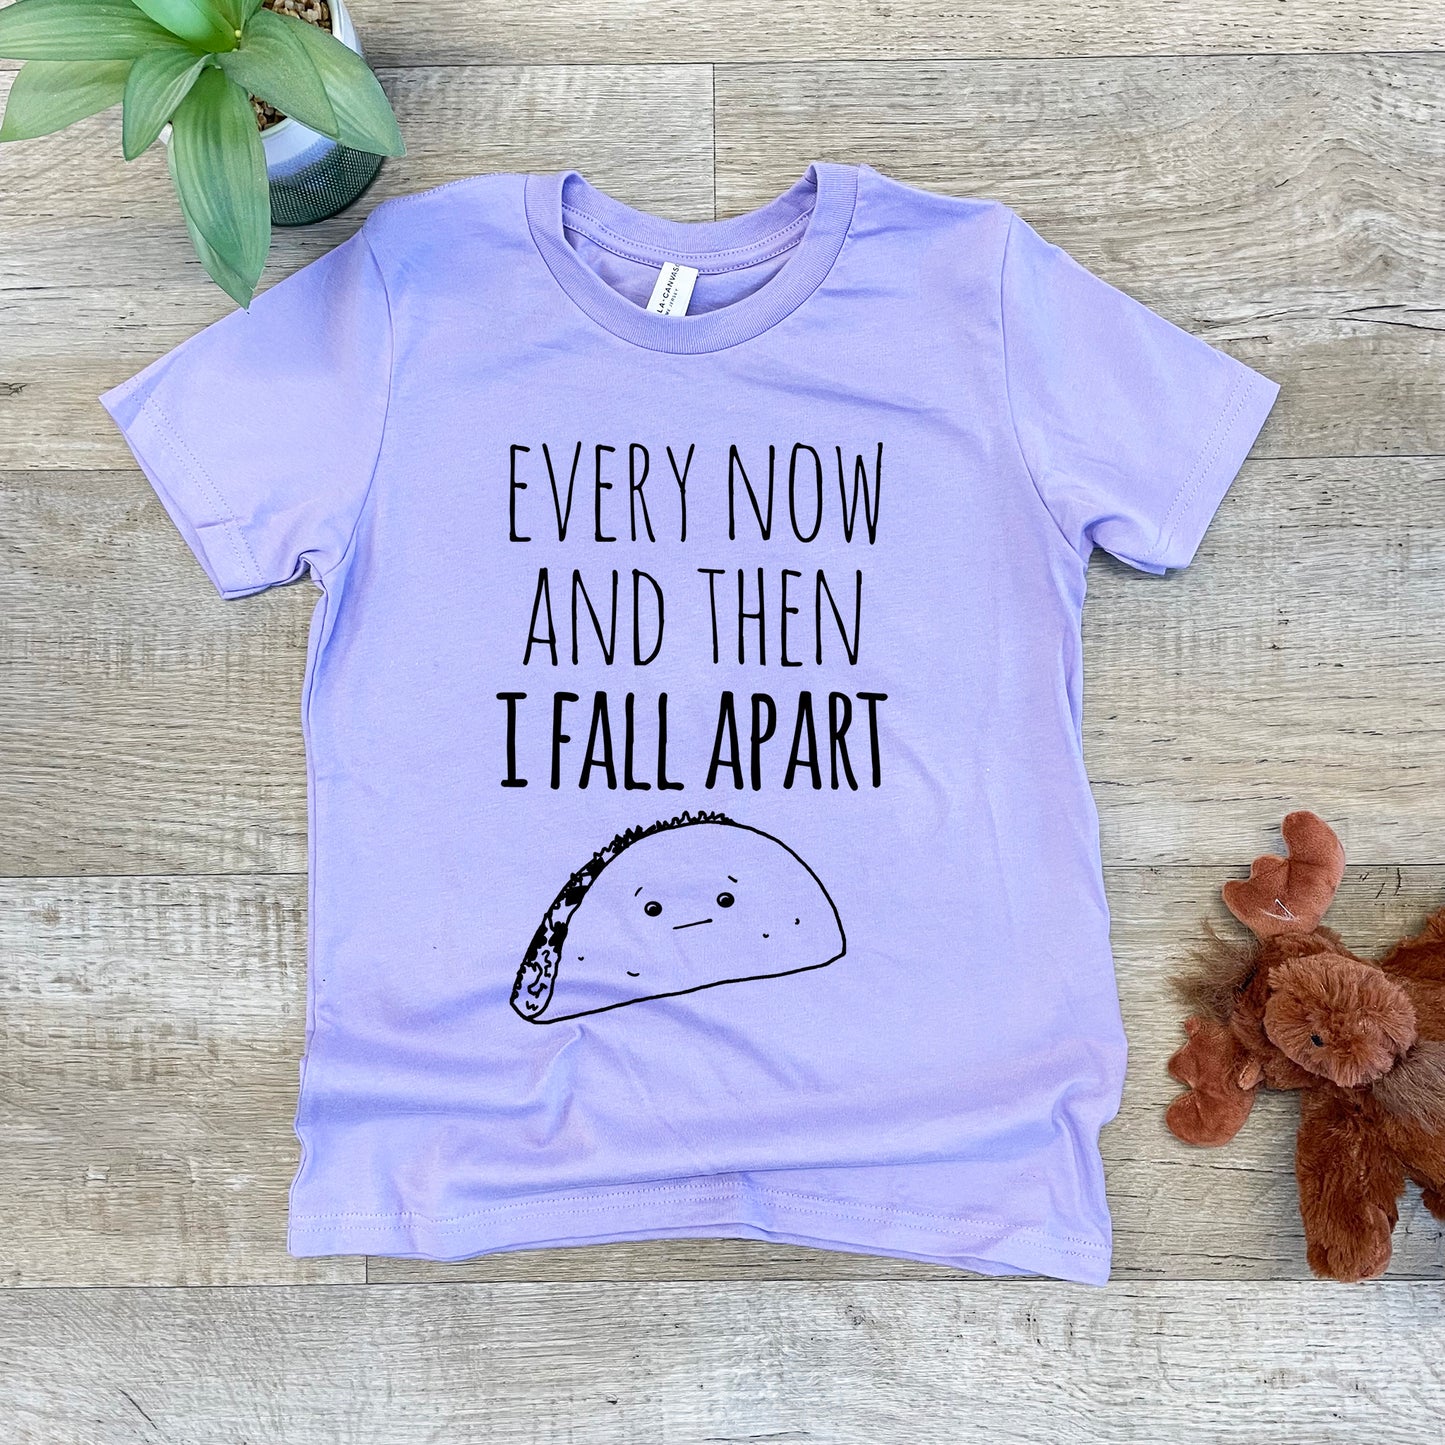 Every Now And Then I Fall Apart (Taco) - Kid's Tee - Columbia Blue or Lavender